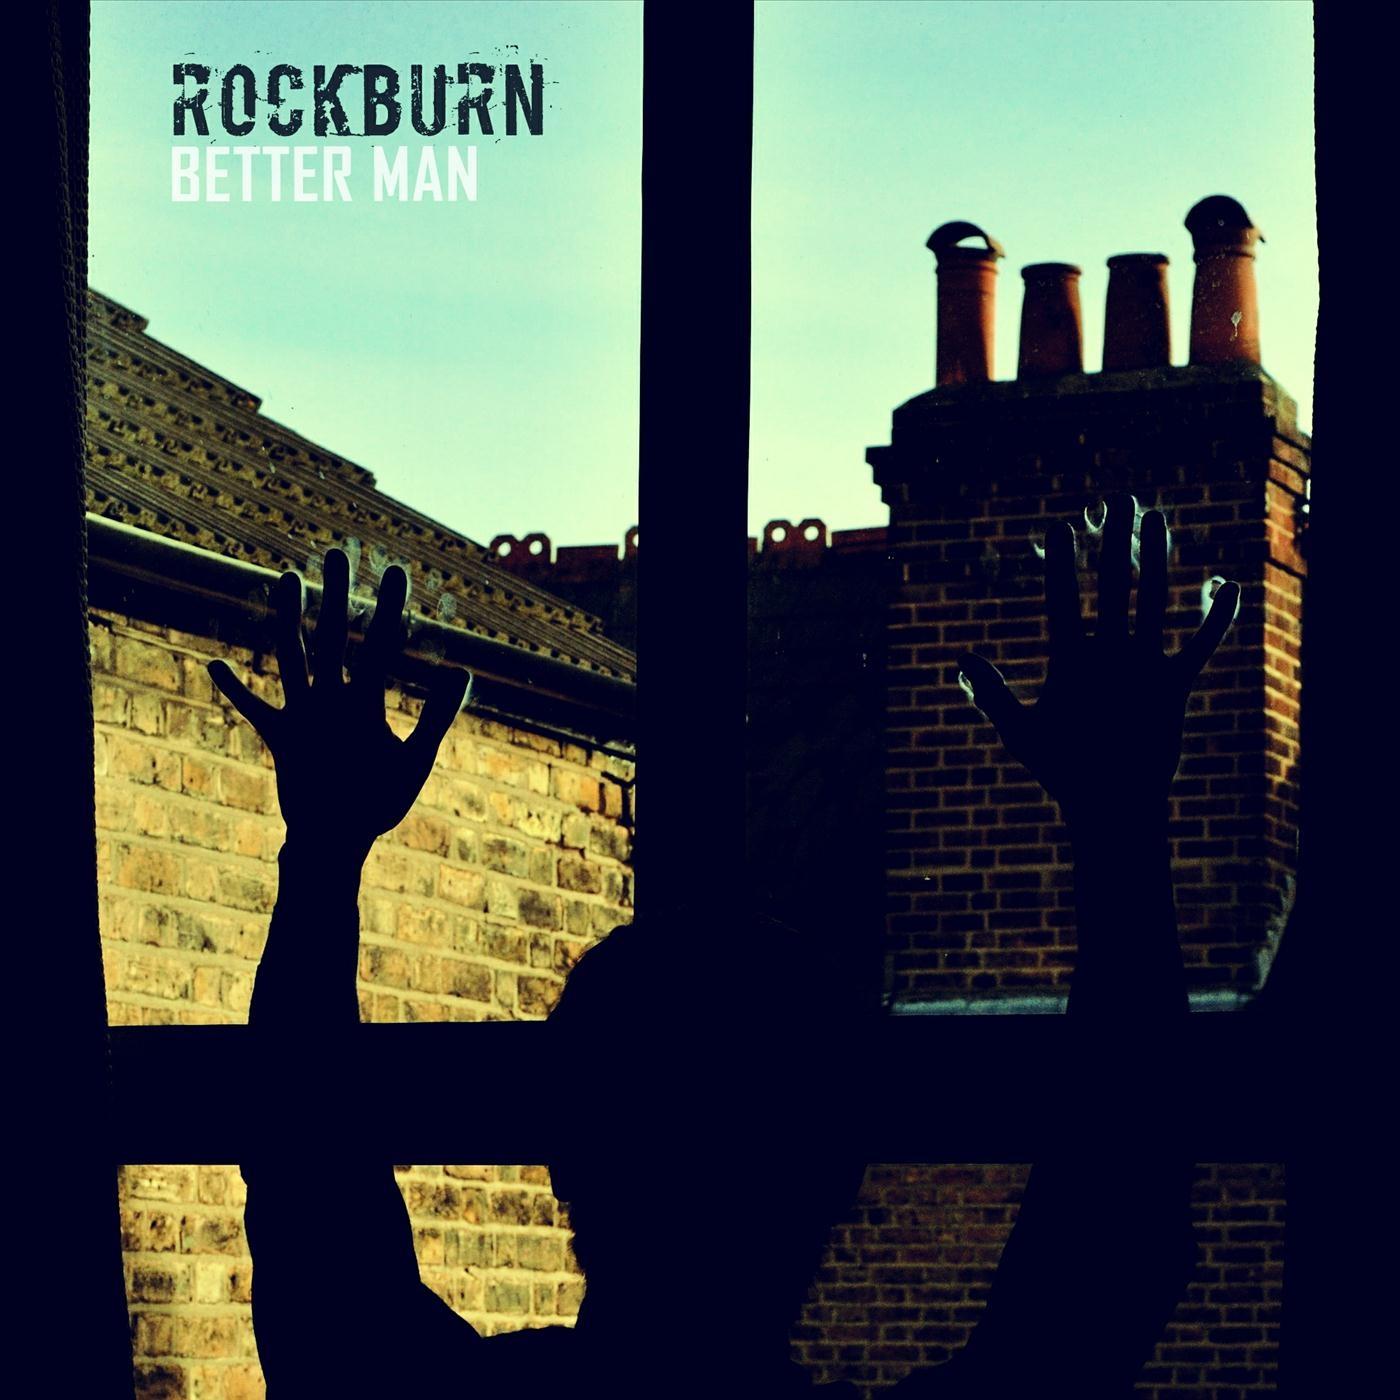 Rockburn - The Day Remains the Same